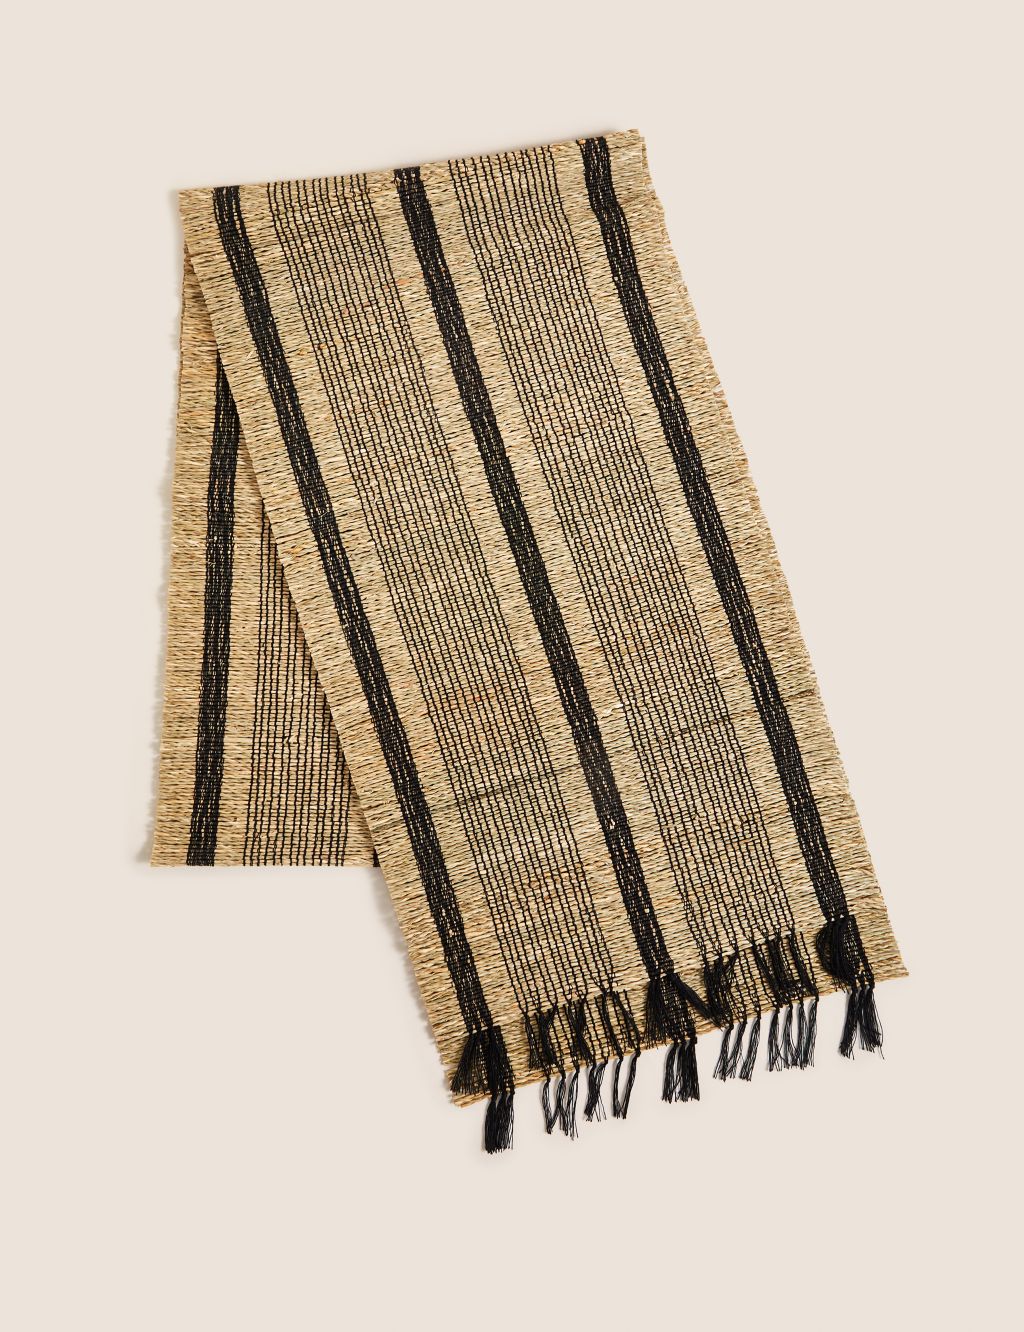 Striped Seagrass Table Runner image 1